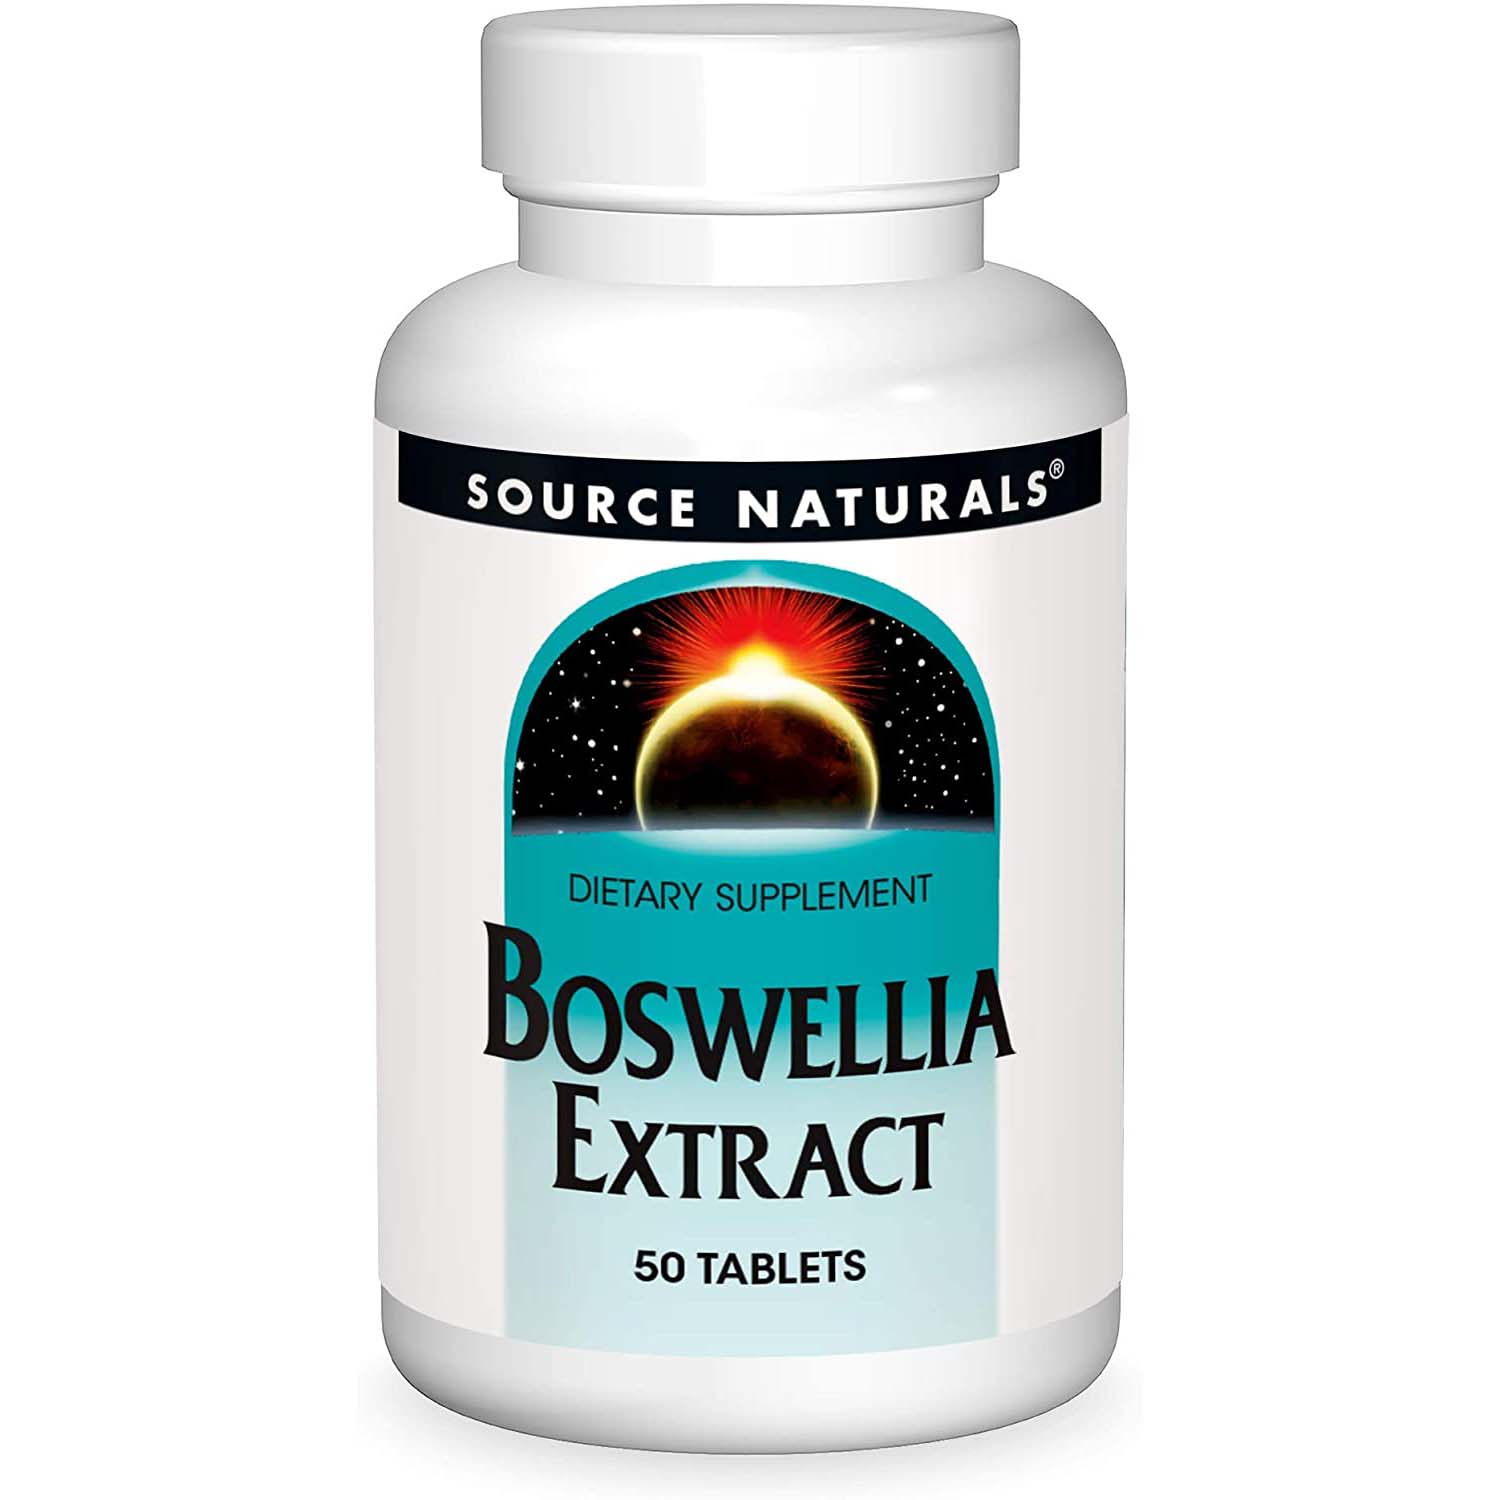 Source Naturals Boswellia Extract, 50 Tablets